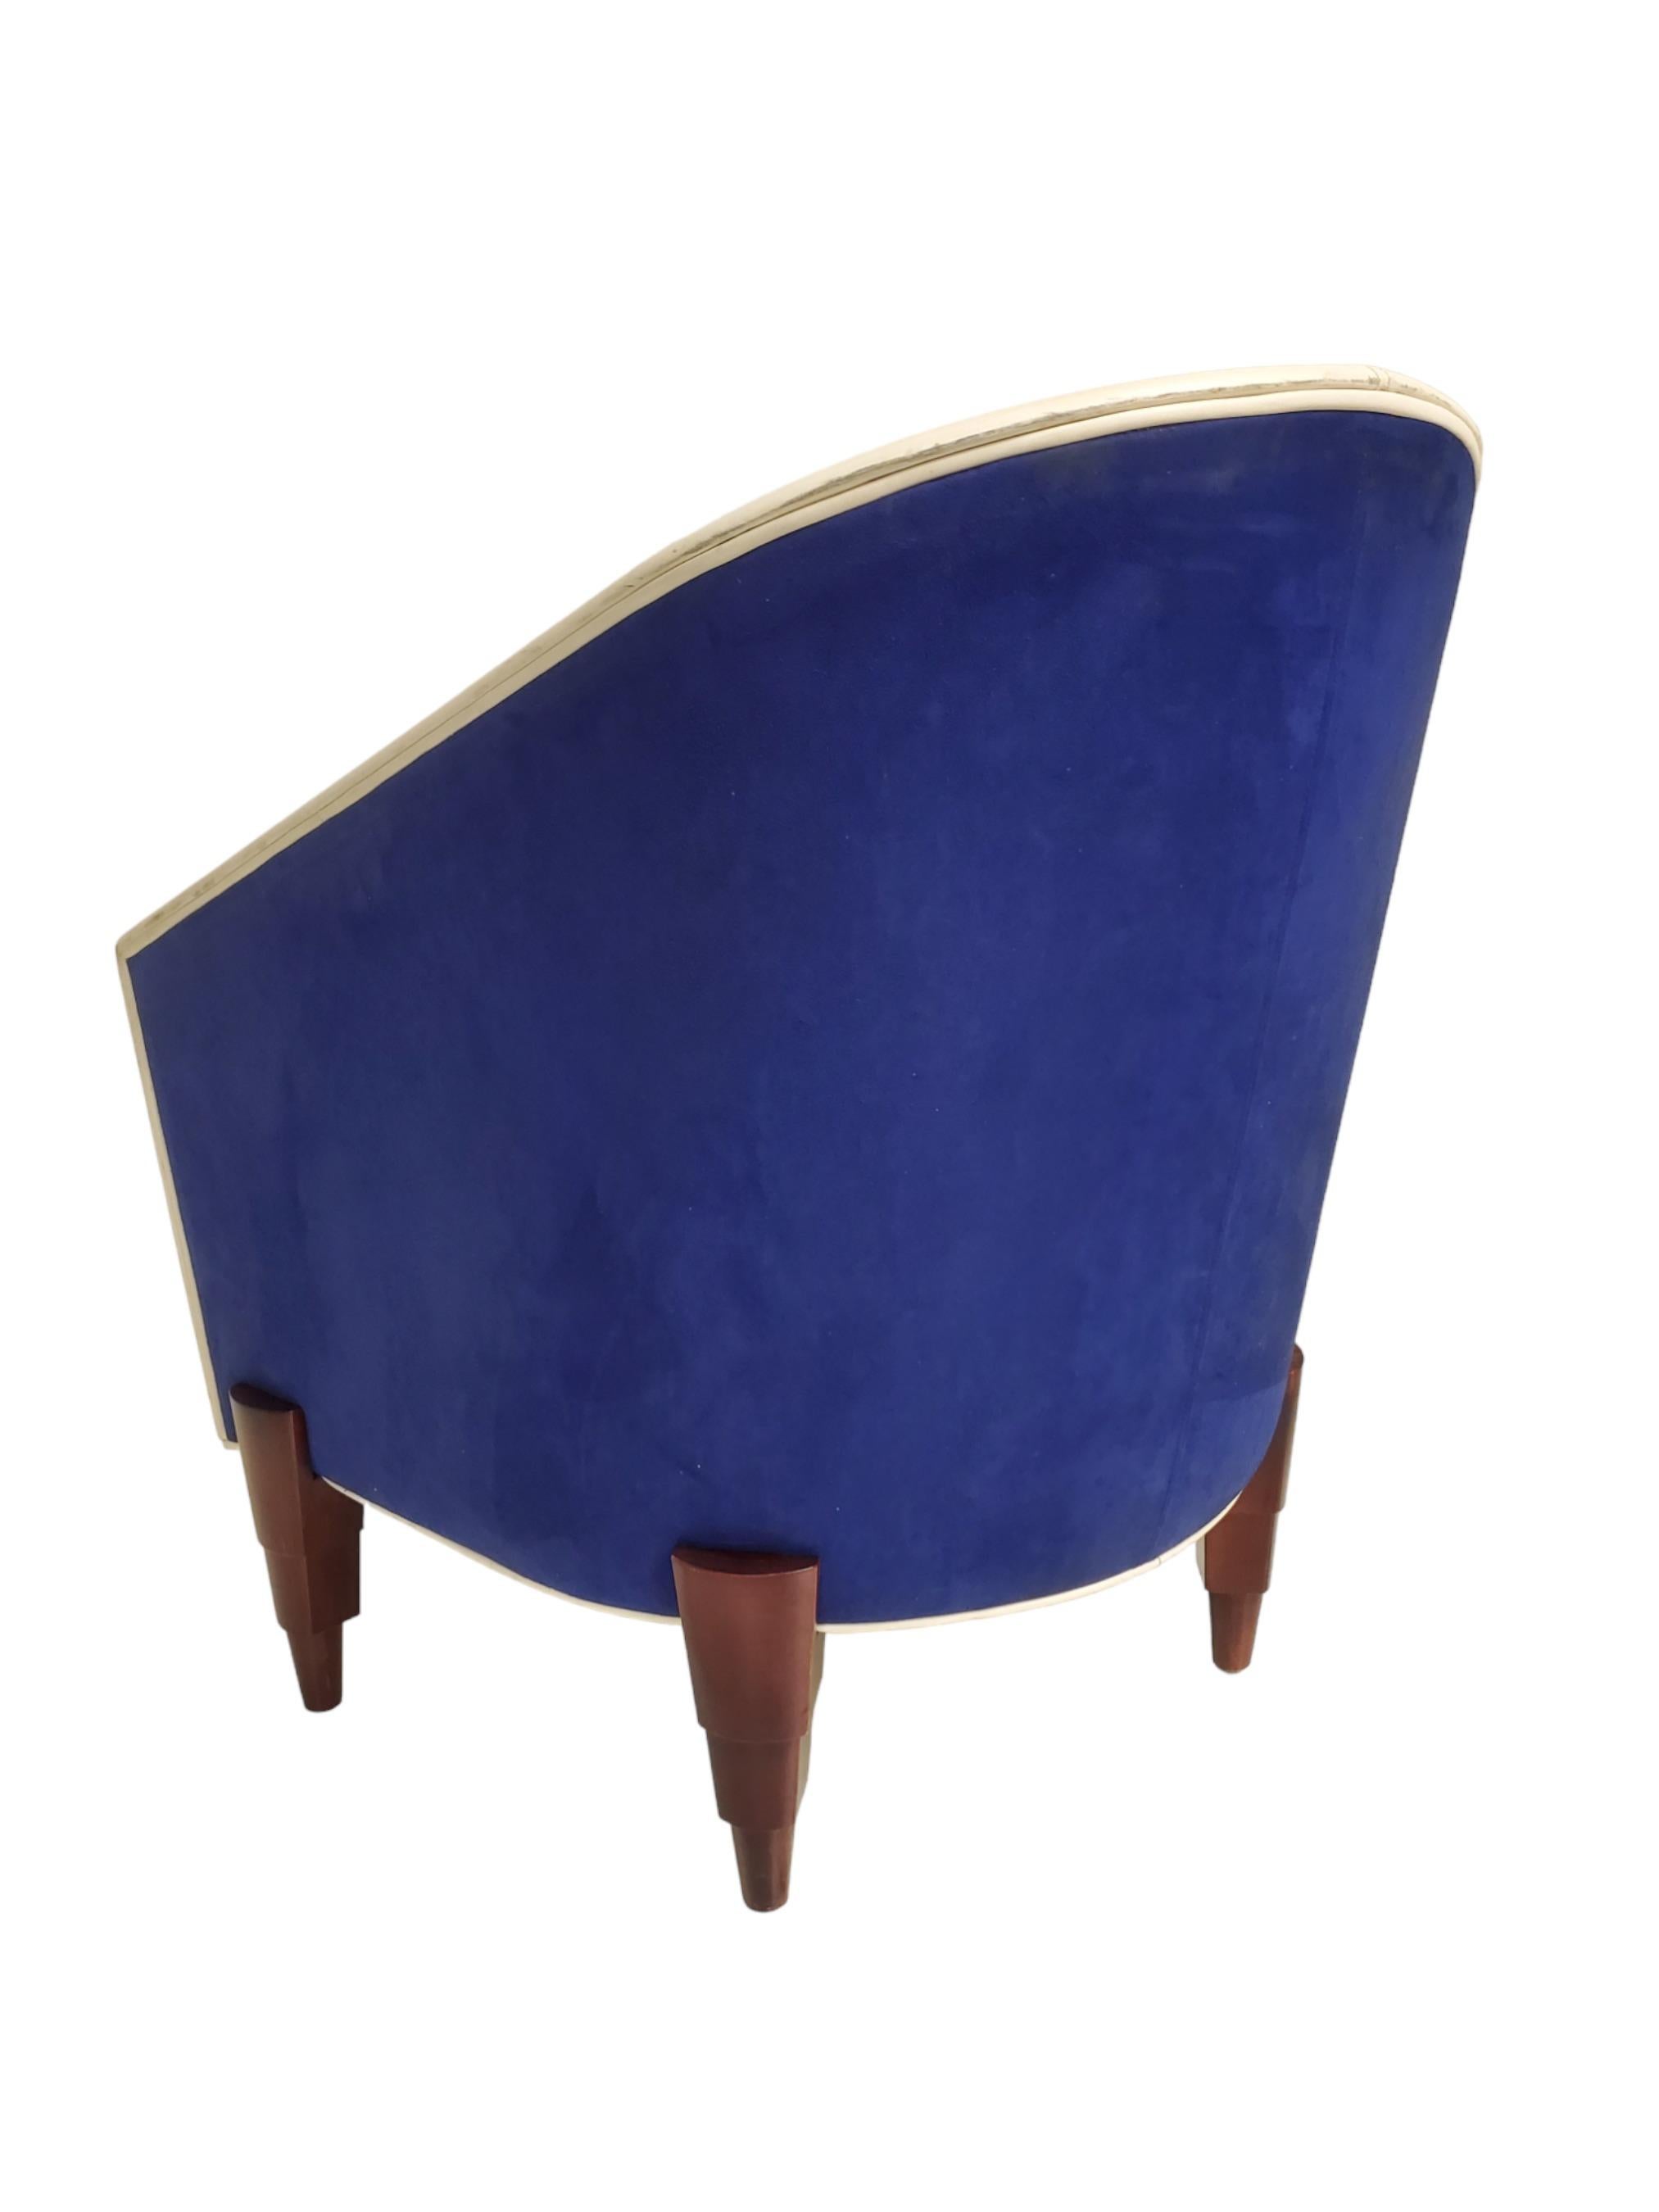 An Italian 1960's Colber International suede + mohair club /arm / side chair For Sale 1